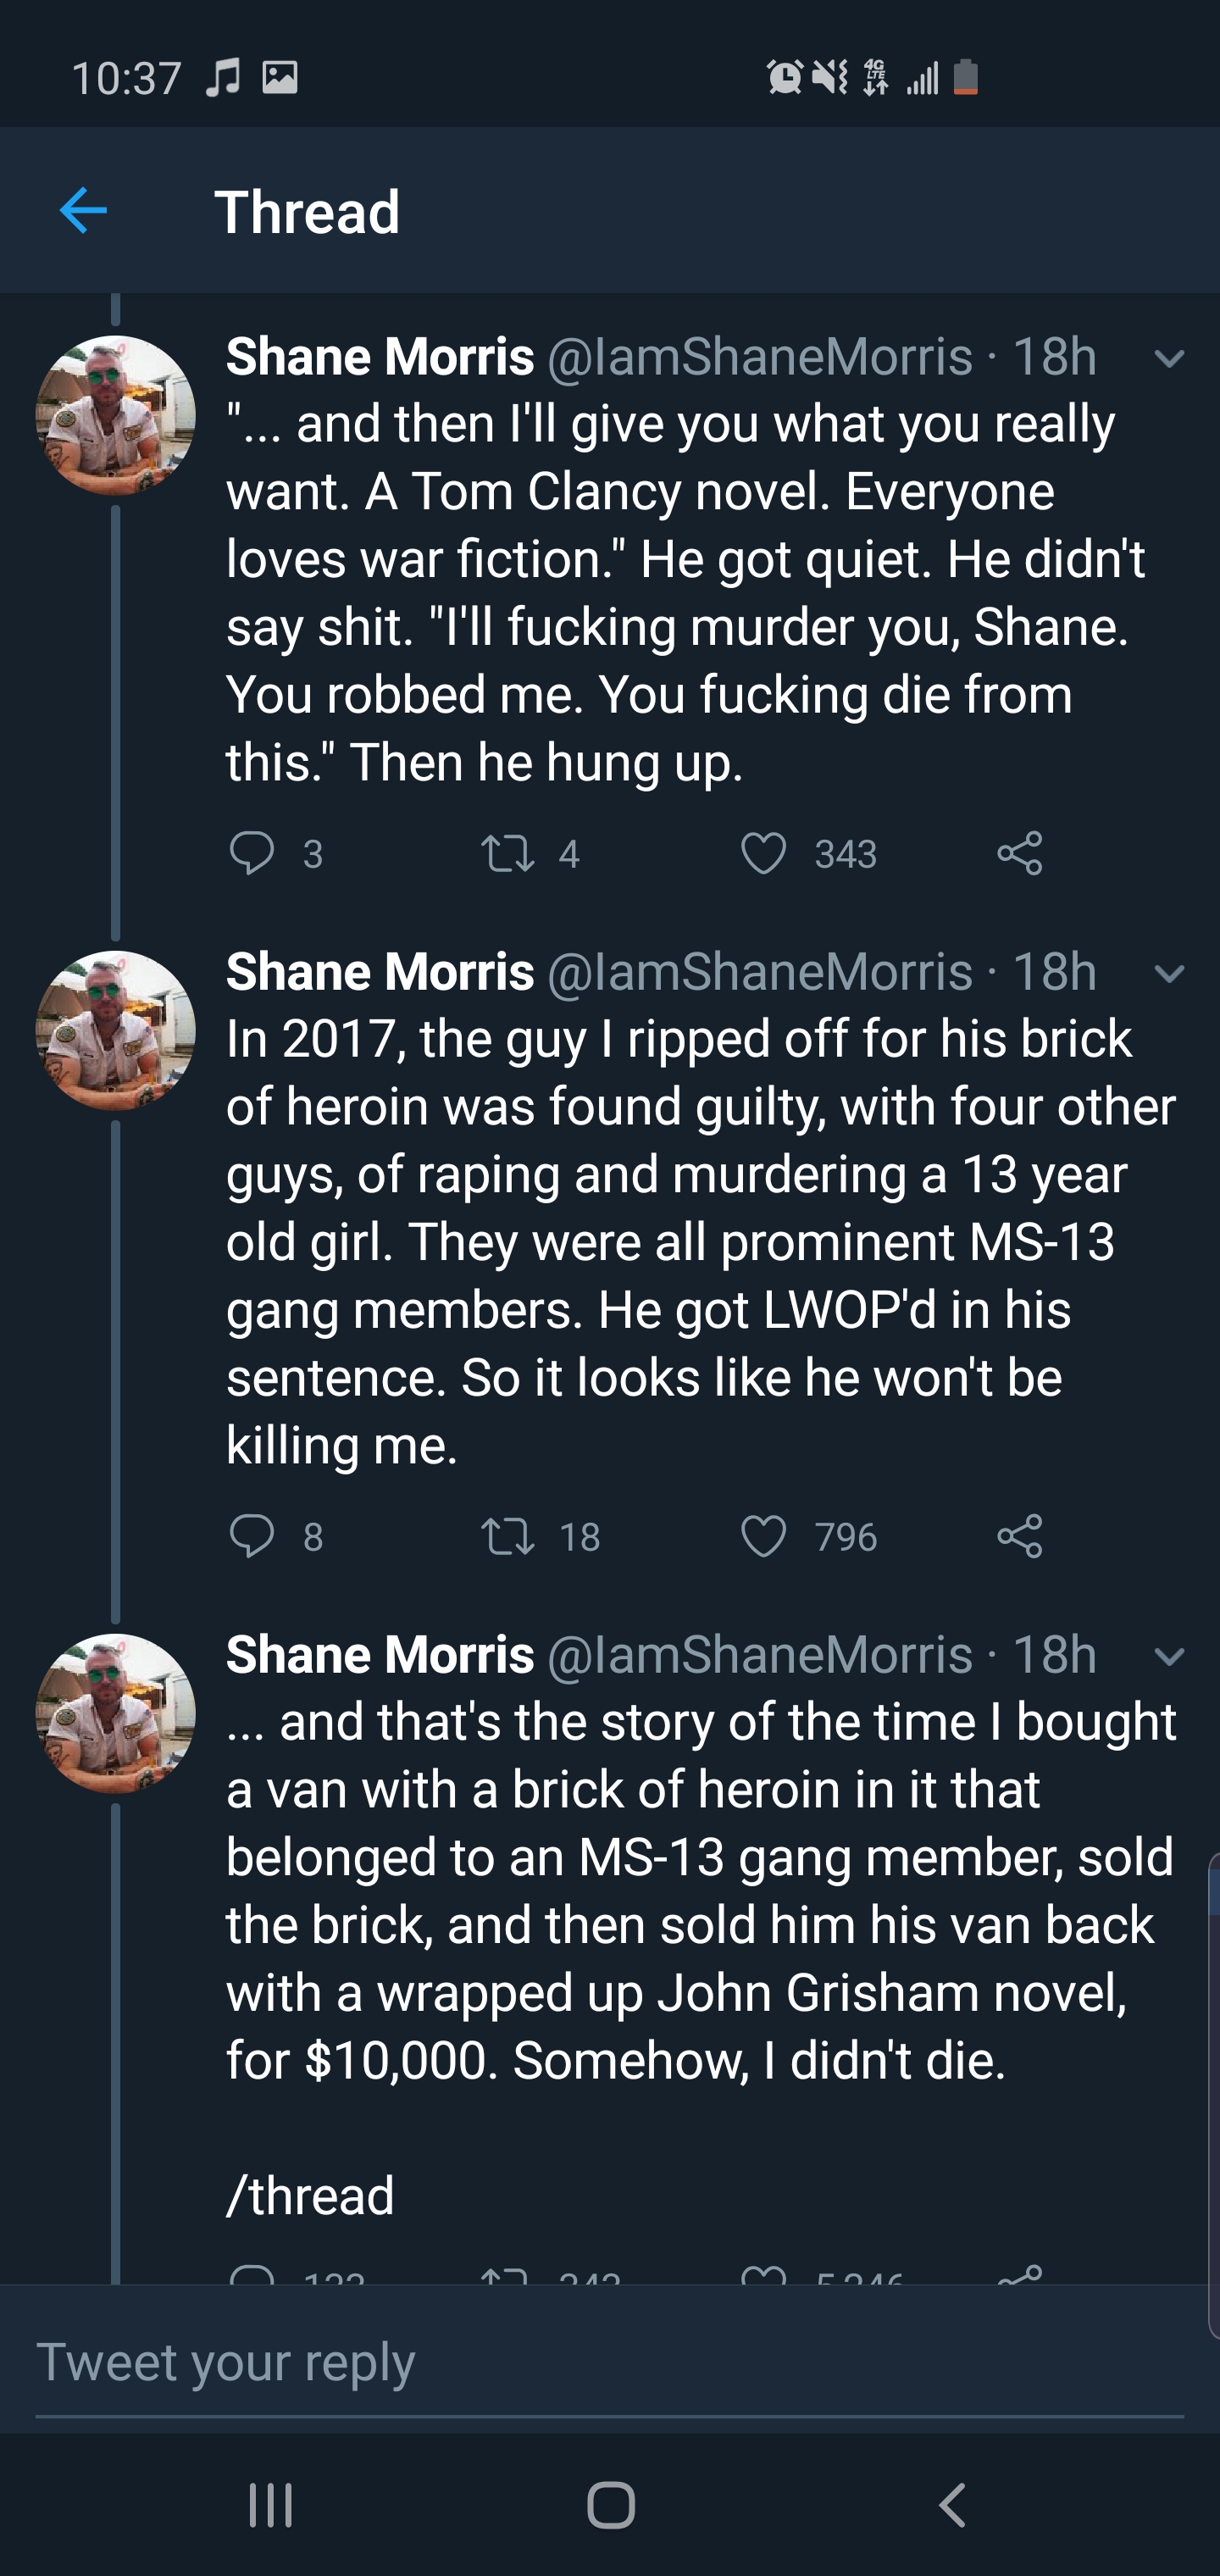 screenshot - Je 40 Thread Shane Morris 18h "... and then I'll give you what you really want. A Tom Clancy novel. Everyone loves war fiction." He got quiet. He didn't say shit. "I'll fucking murder you, Shane. You robbed me. You fucking die from this.' The